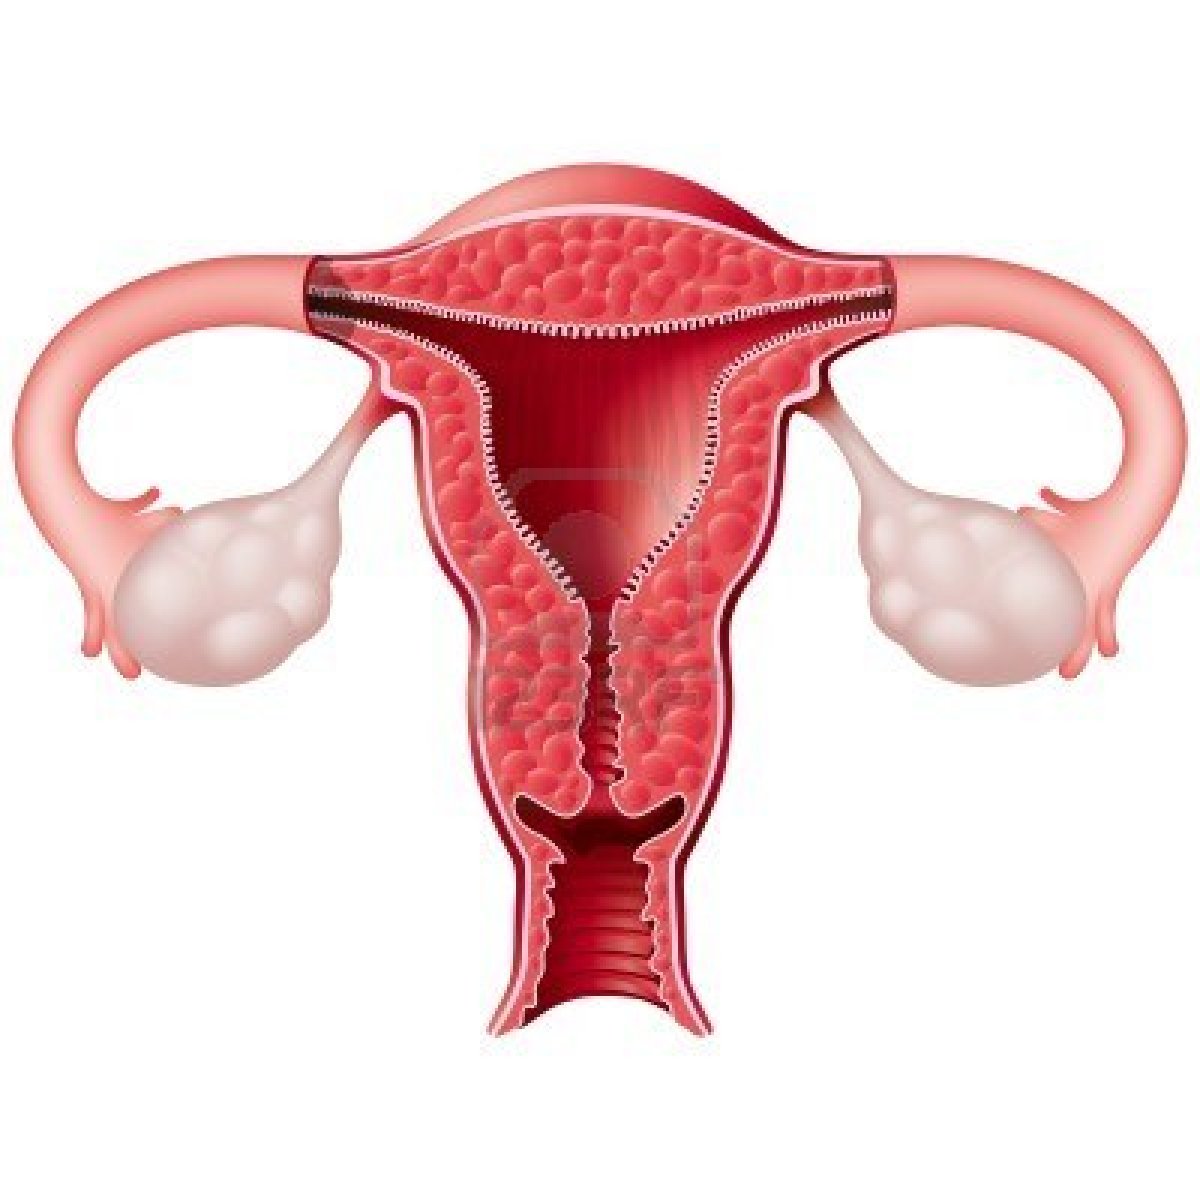 Standard Note: THE FEMALE REPRODUCTIVE SYSTEM